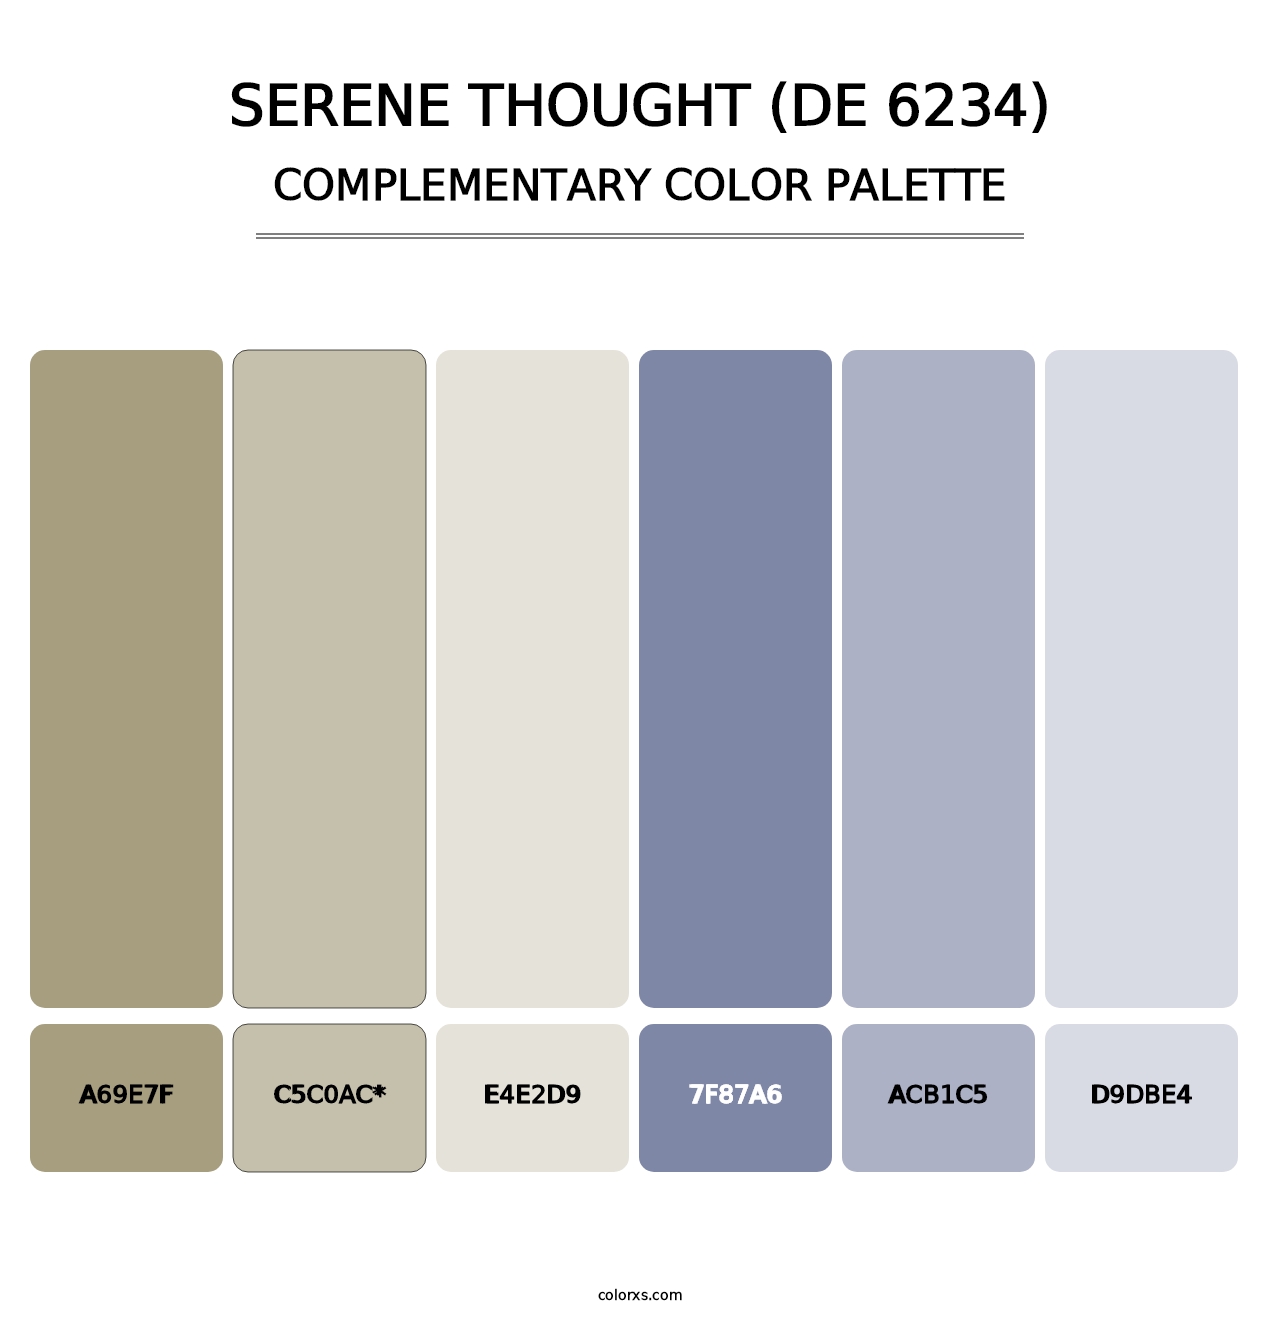 Serene Thought (DE 6234) - Complementary Color Palette